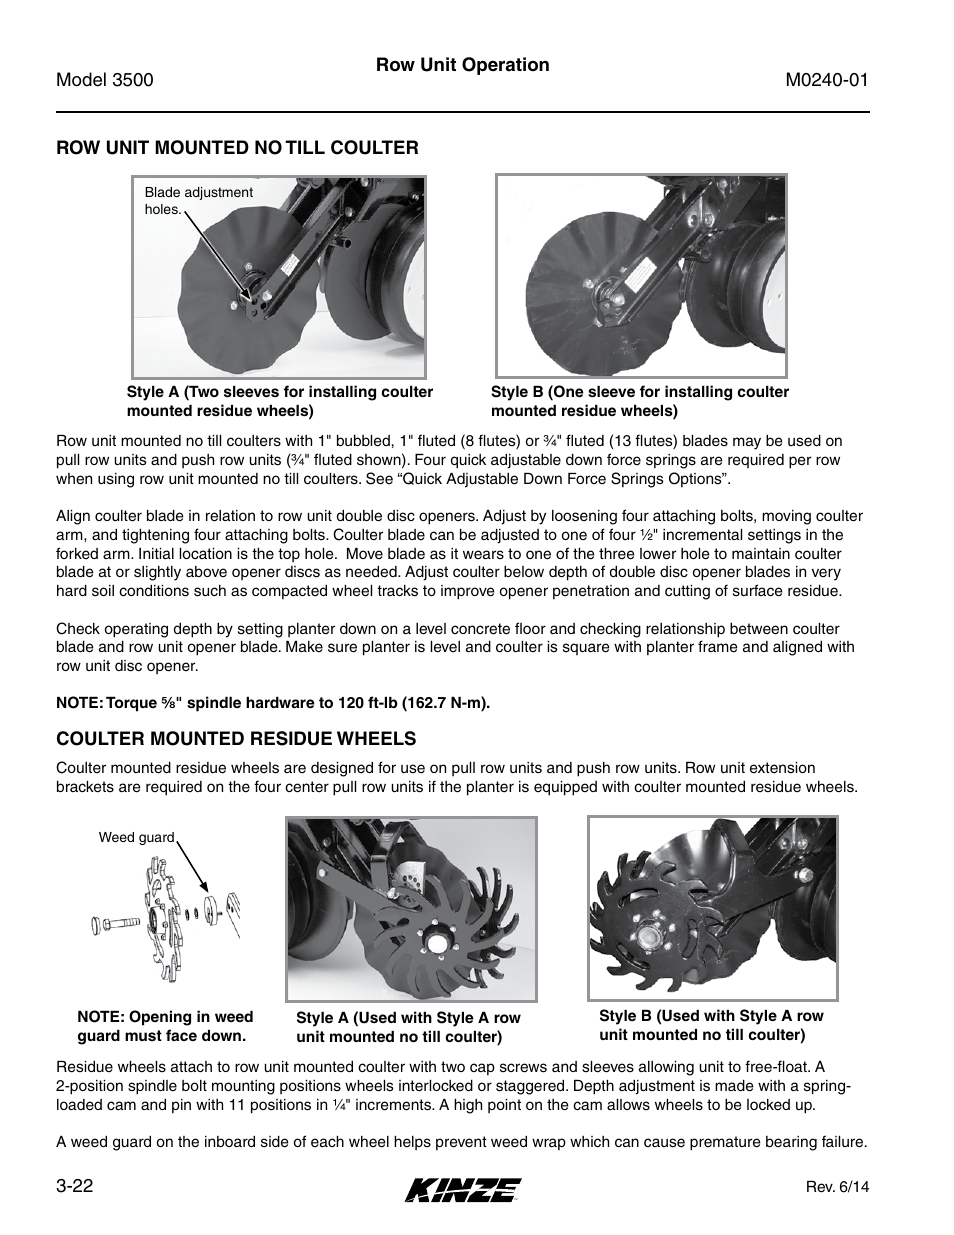 Row unit mounted no till coulter, Coulter mounted residue wheels, Row unit mounted no till coulter -22 | Coulter mounted residue wheels -22 | Kinze 3500 Lift and Rotate Planter Rev. 7/14 User Manual | Page 56 / 140